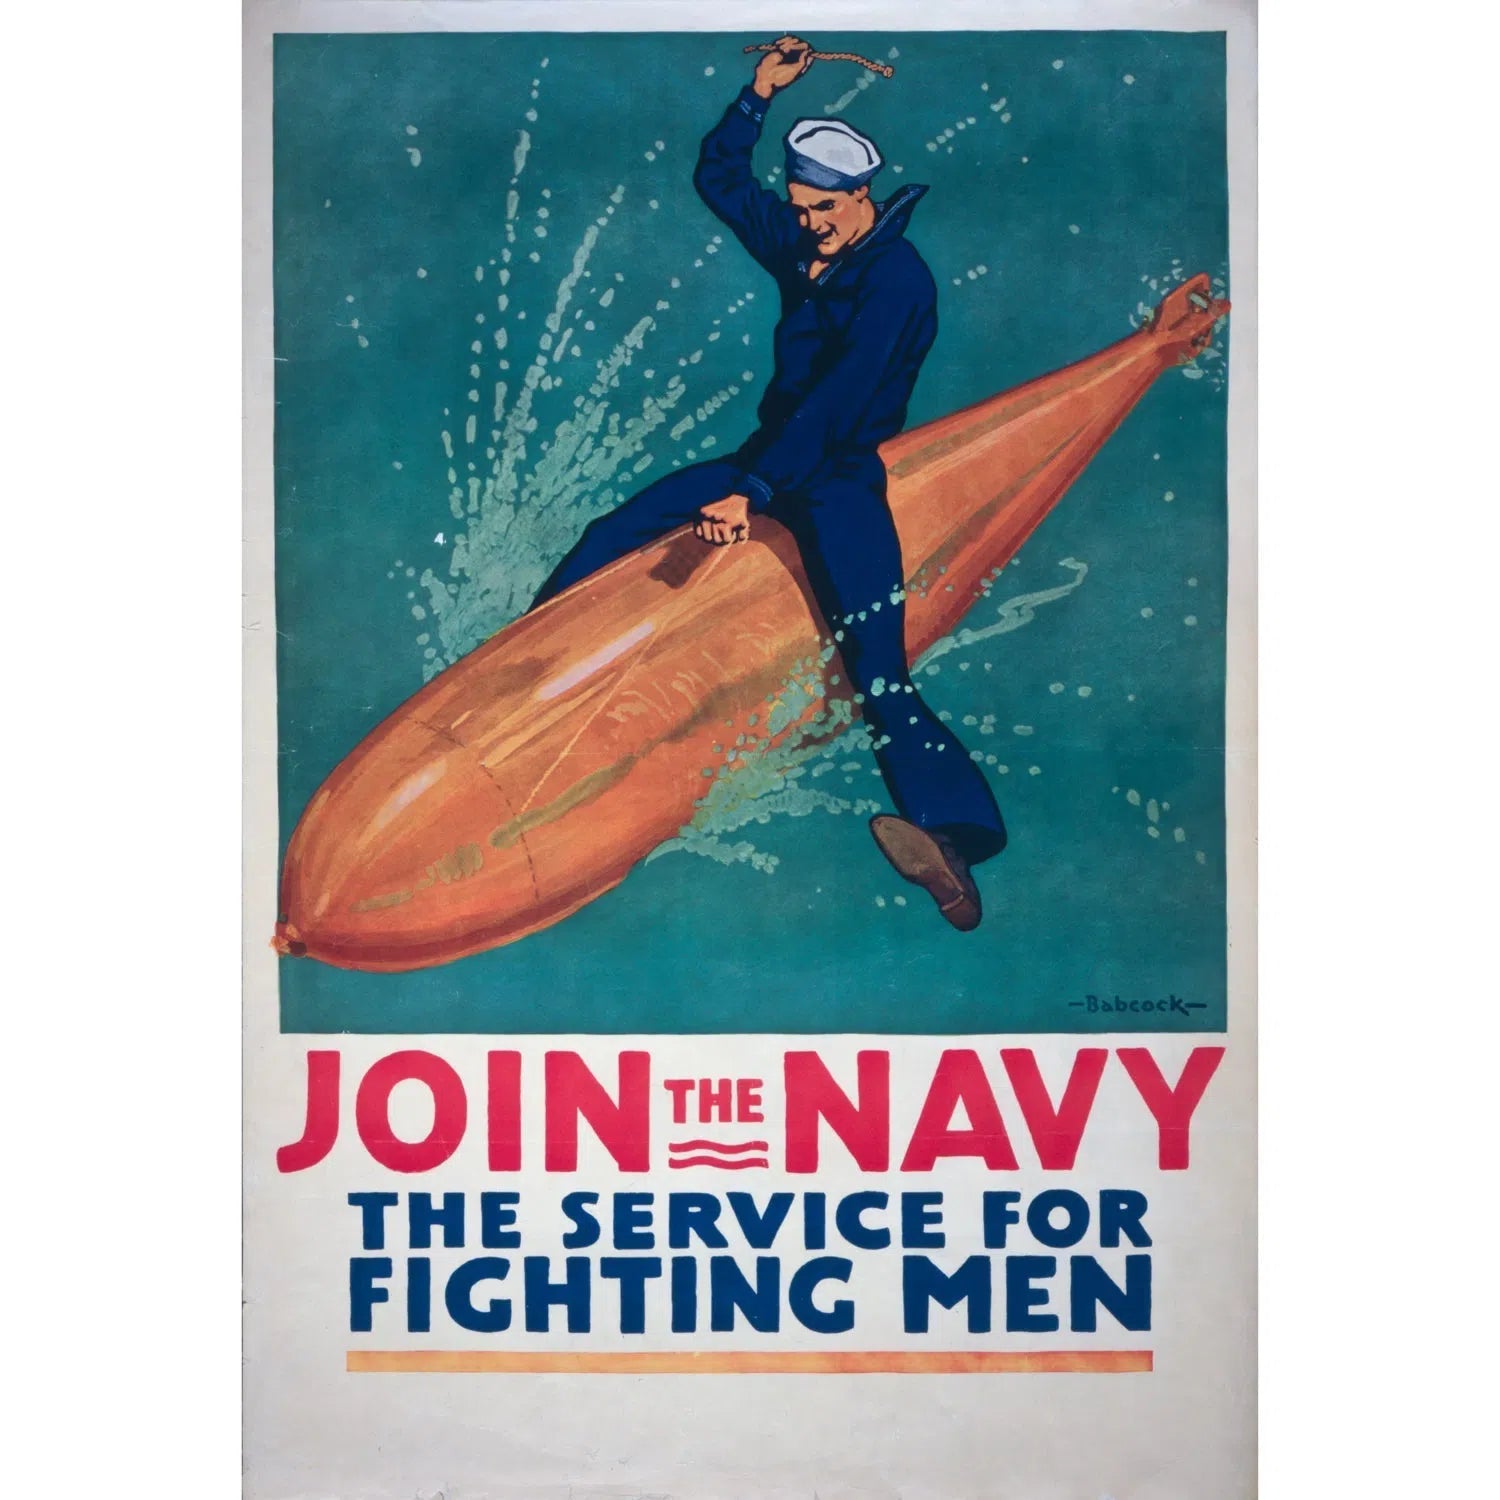 Join the army - The service for fighting men-Imagesdartistes